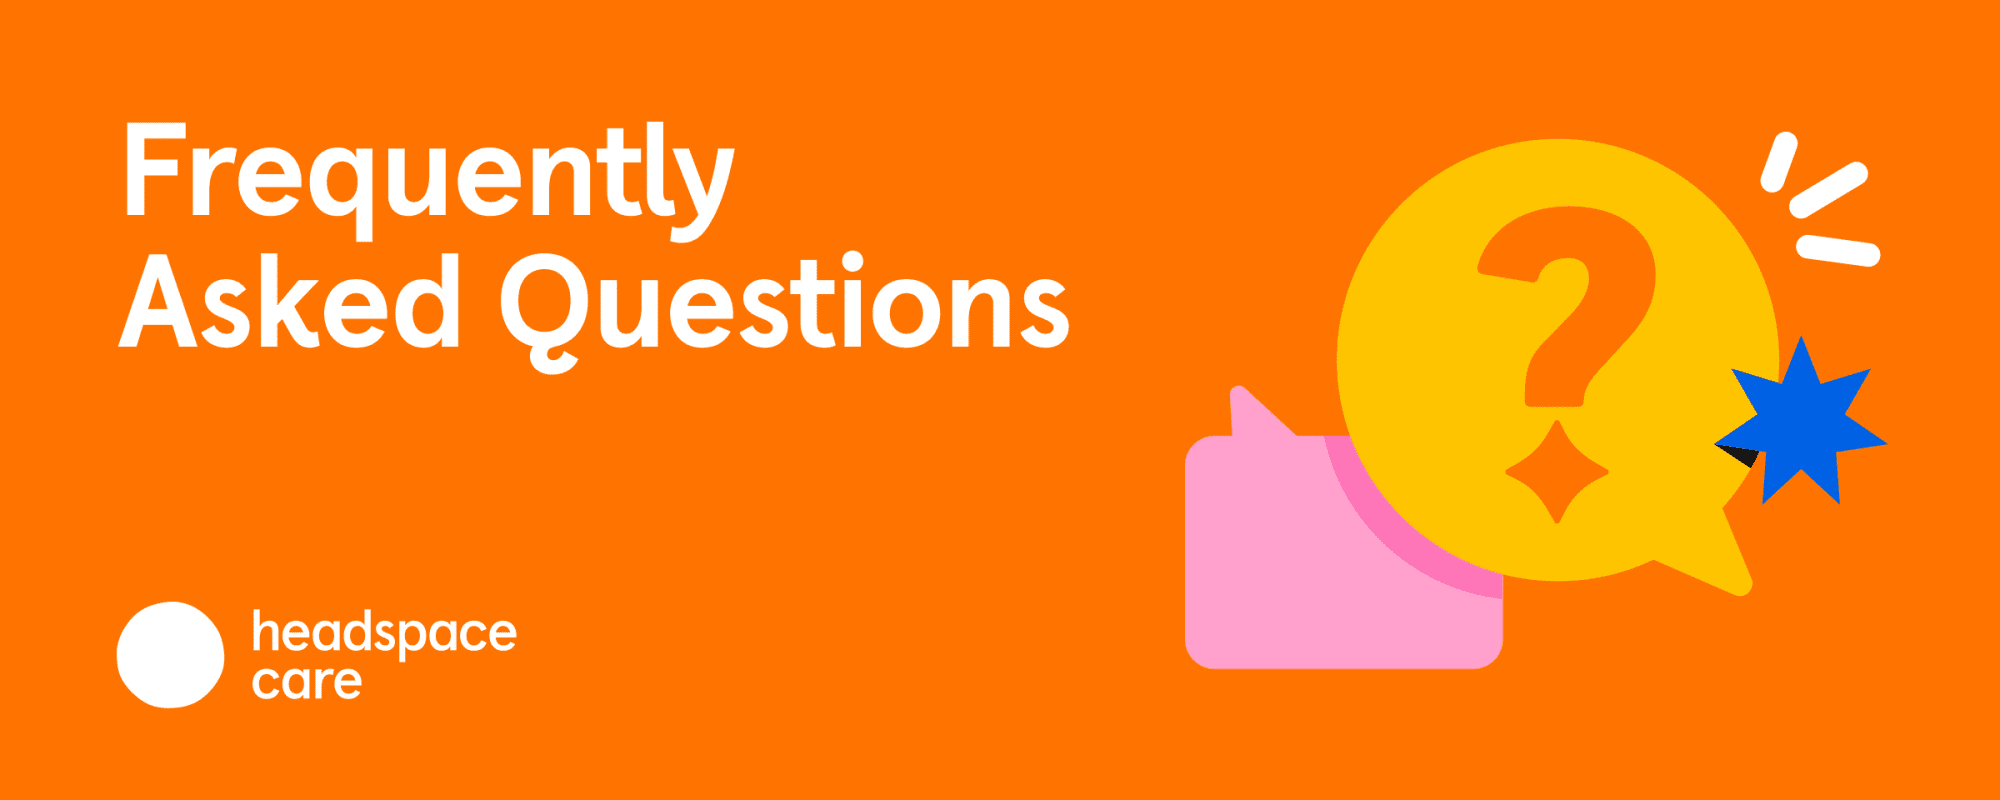 Frequently Asked Questions for Headspace Care